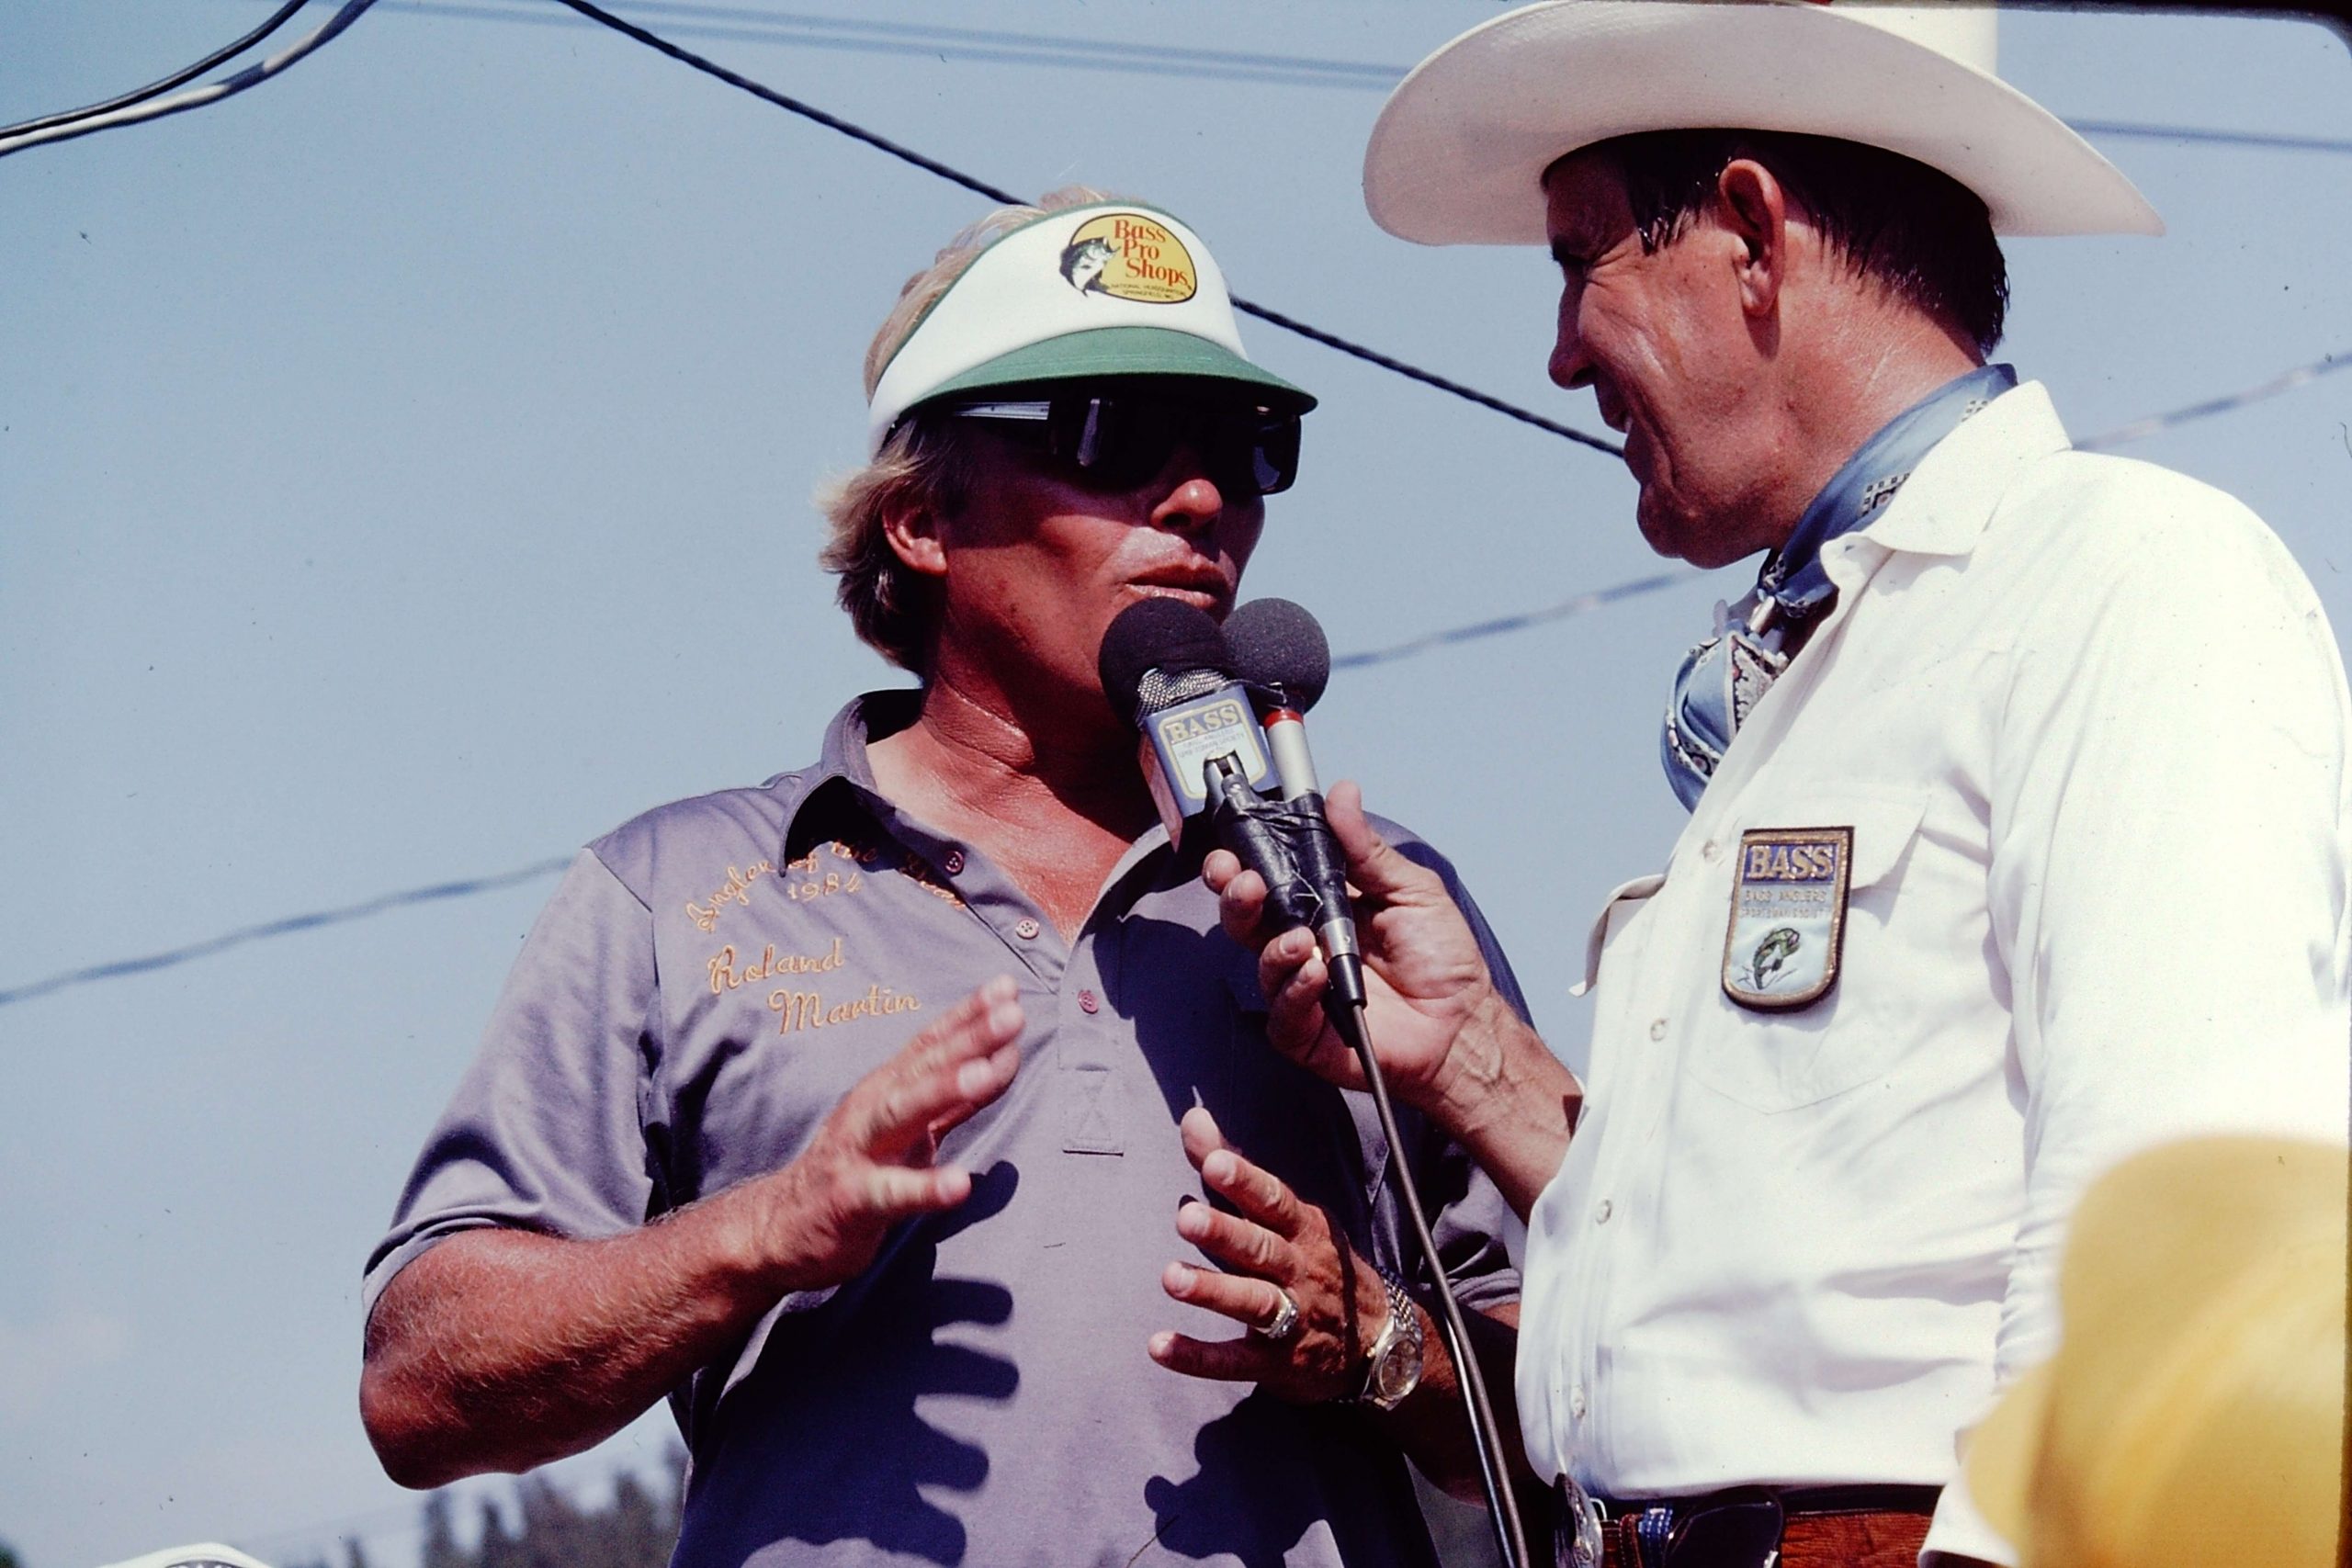 Oldest Angler of the Year: Roland Martin, 45
Roland Martin not only won more AOY titles than anyone else, he also continued collecting the AOY trophy well into his career. Here, he accepts the award for the ninth time, in 1985 at age 45.